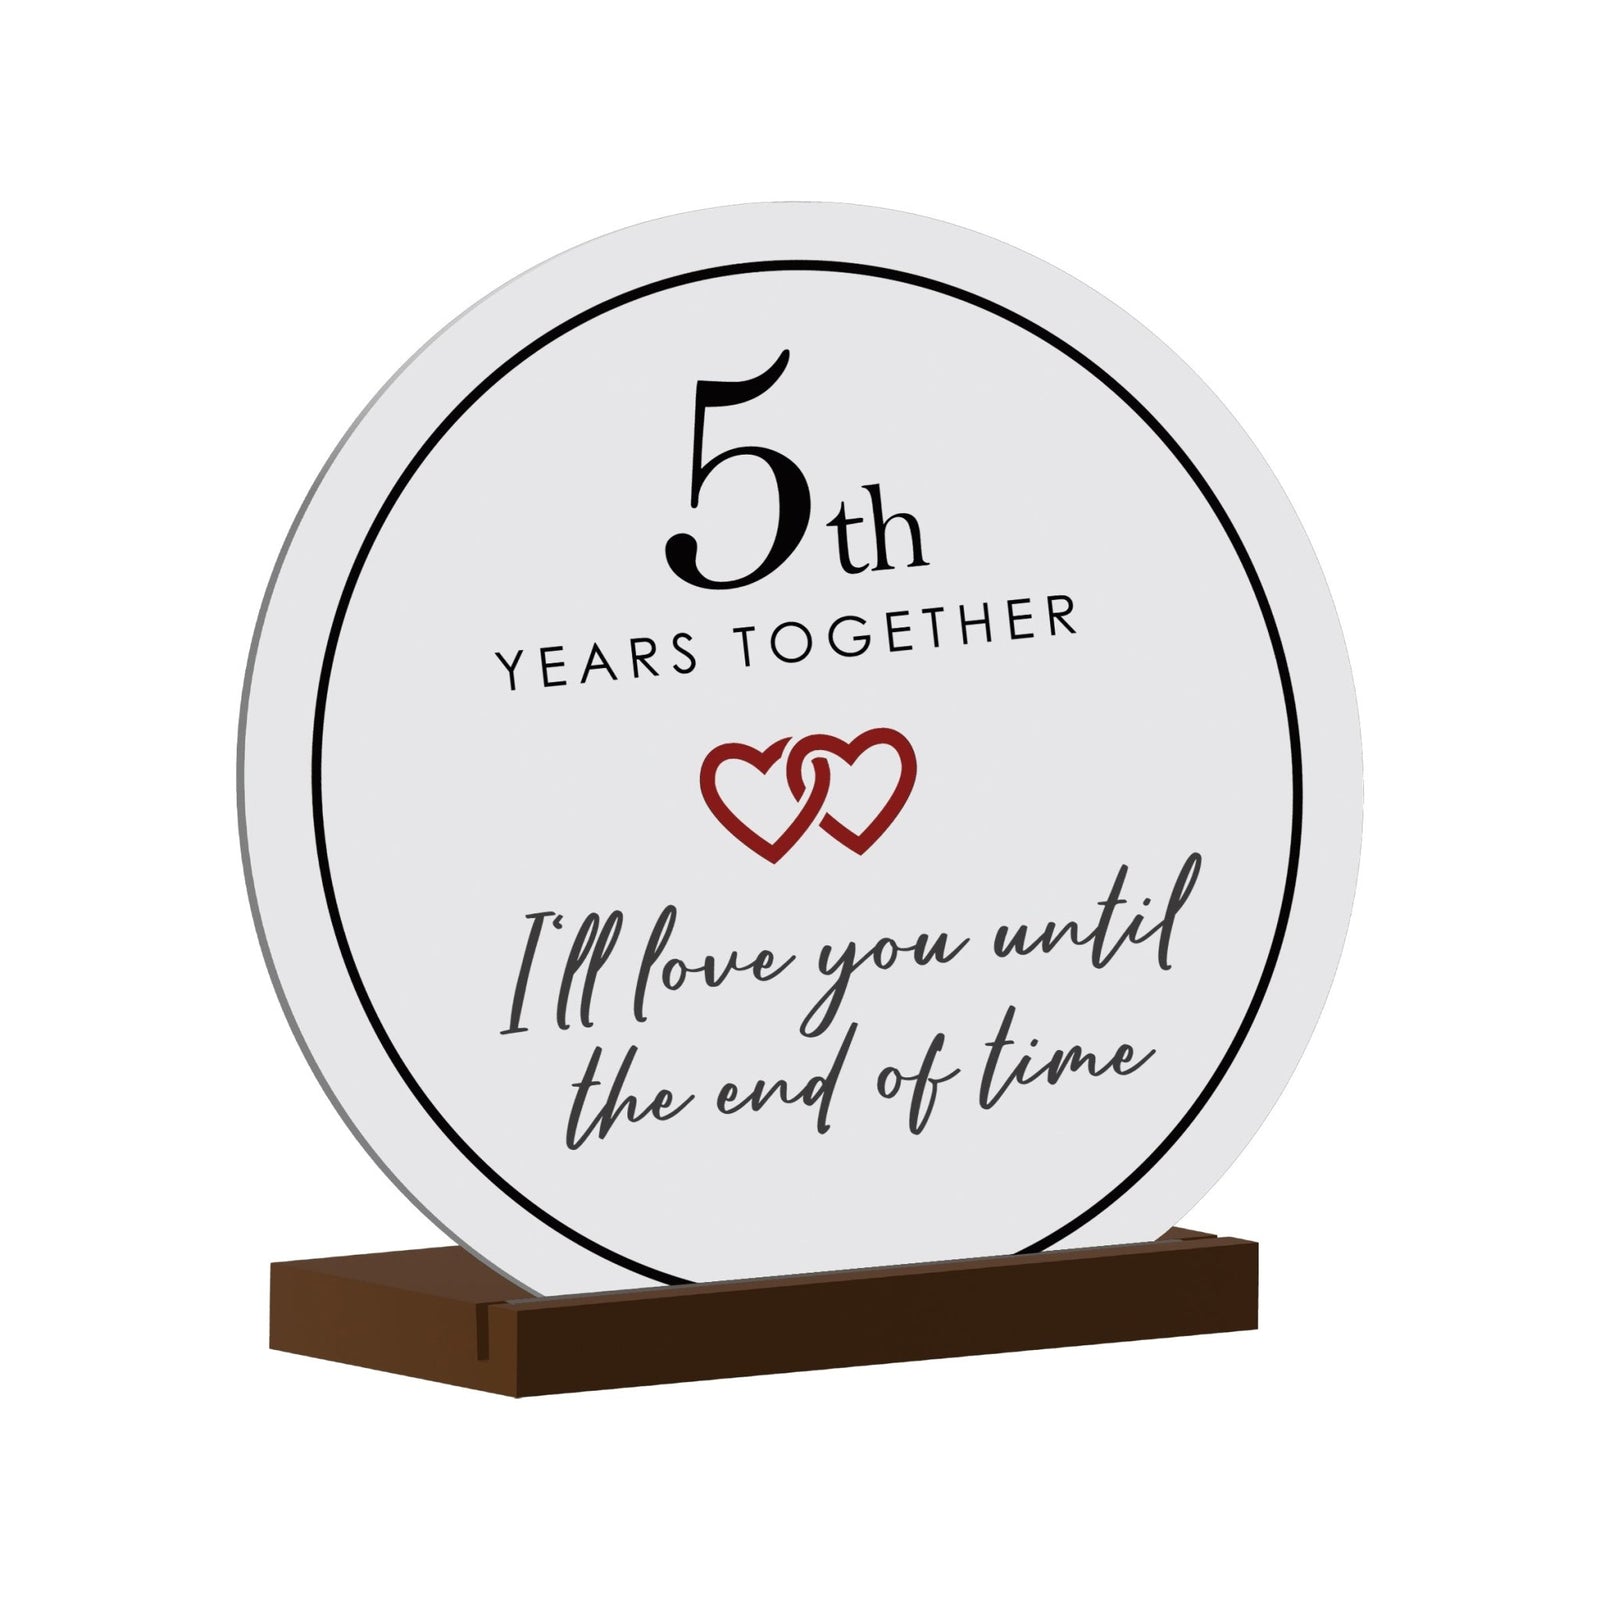 Elegant Wedding Anniversary Celebration Round Sign on Solid Wooden Base - 5th Years Together - LifeSong Milestones